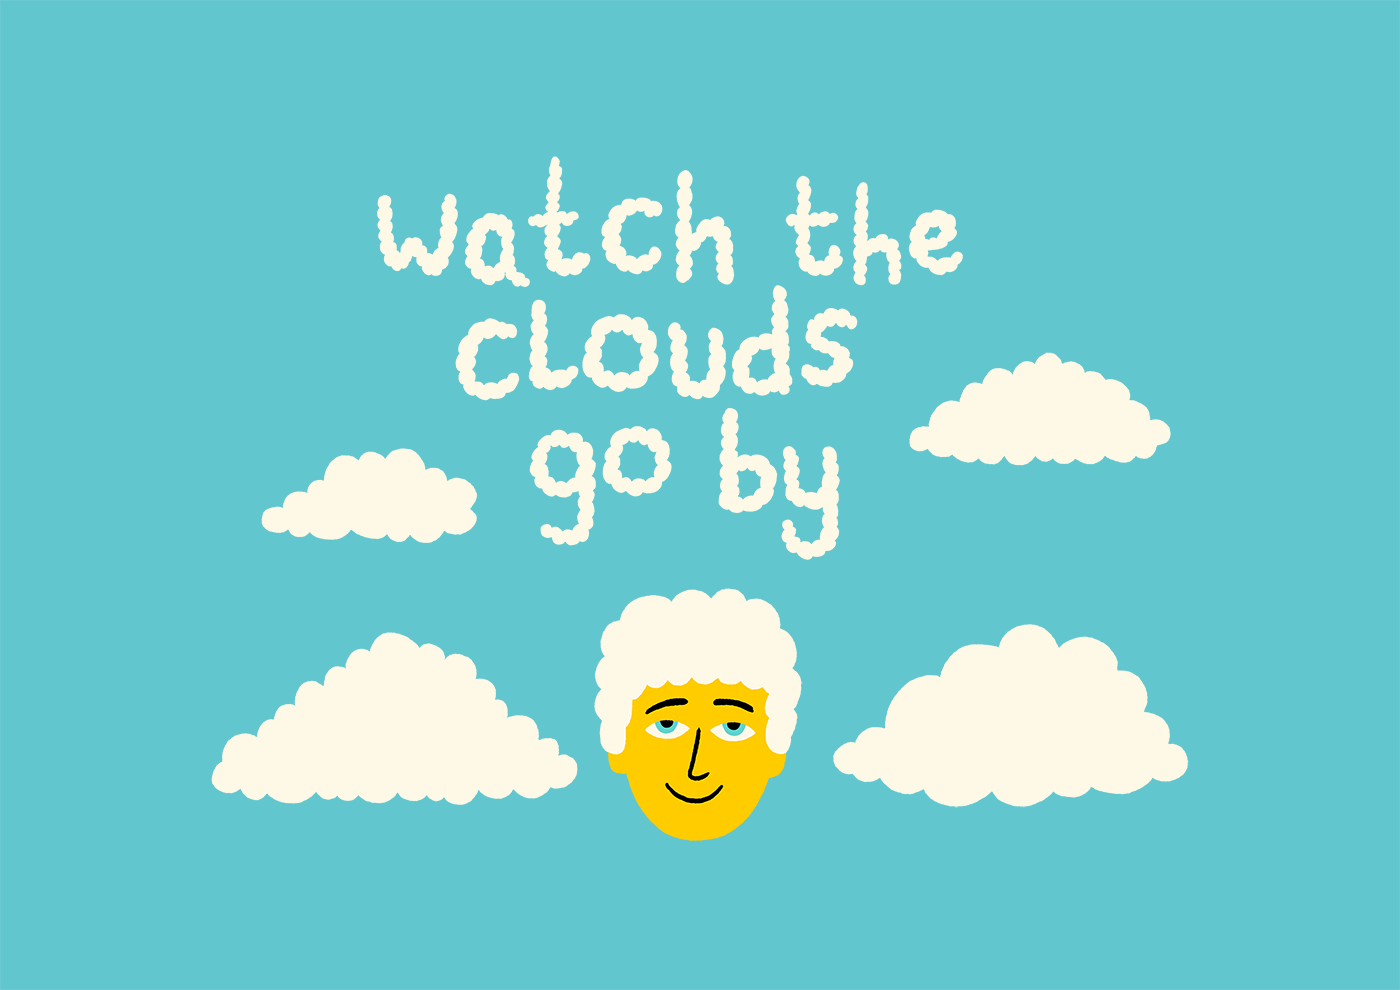 Watch the clouds go by